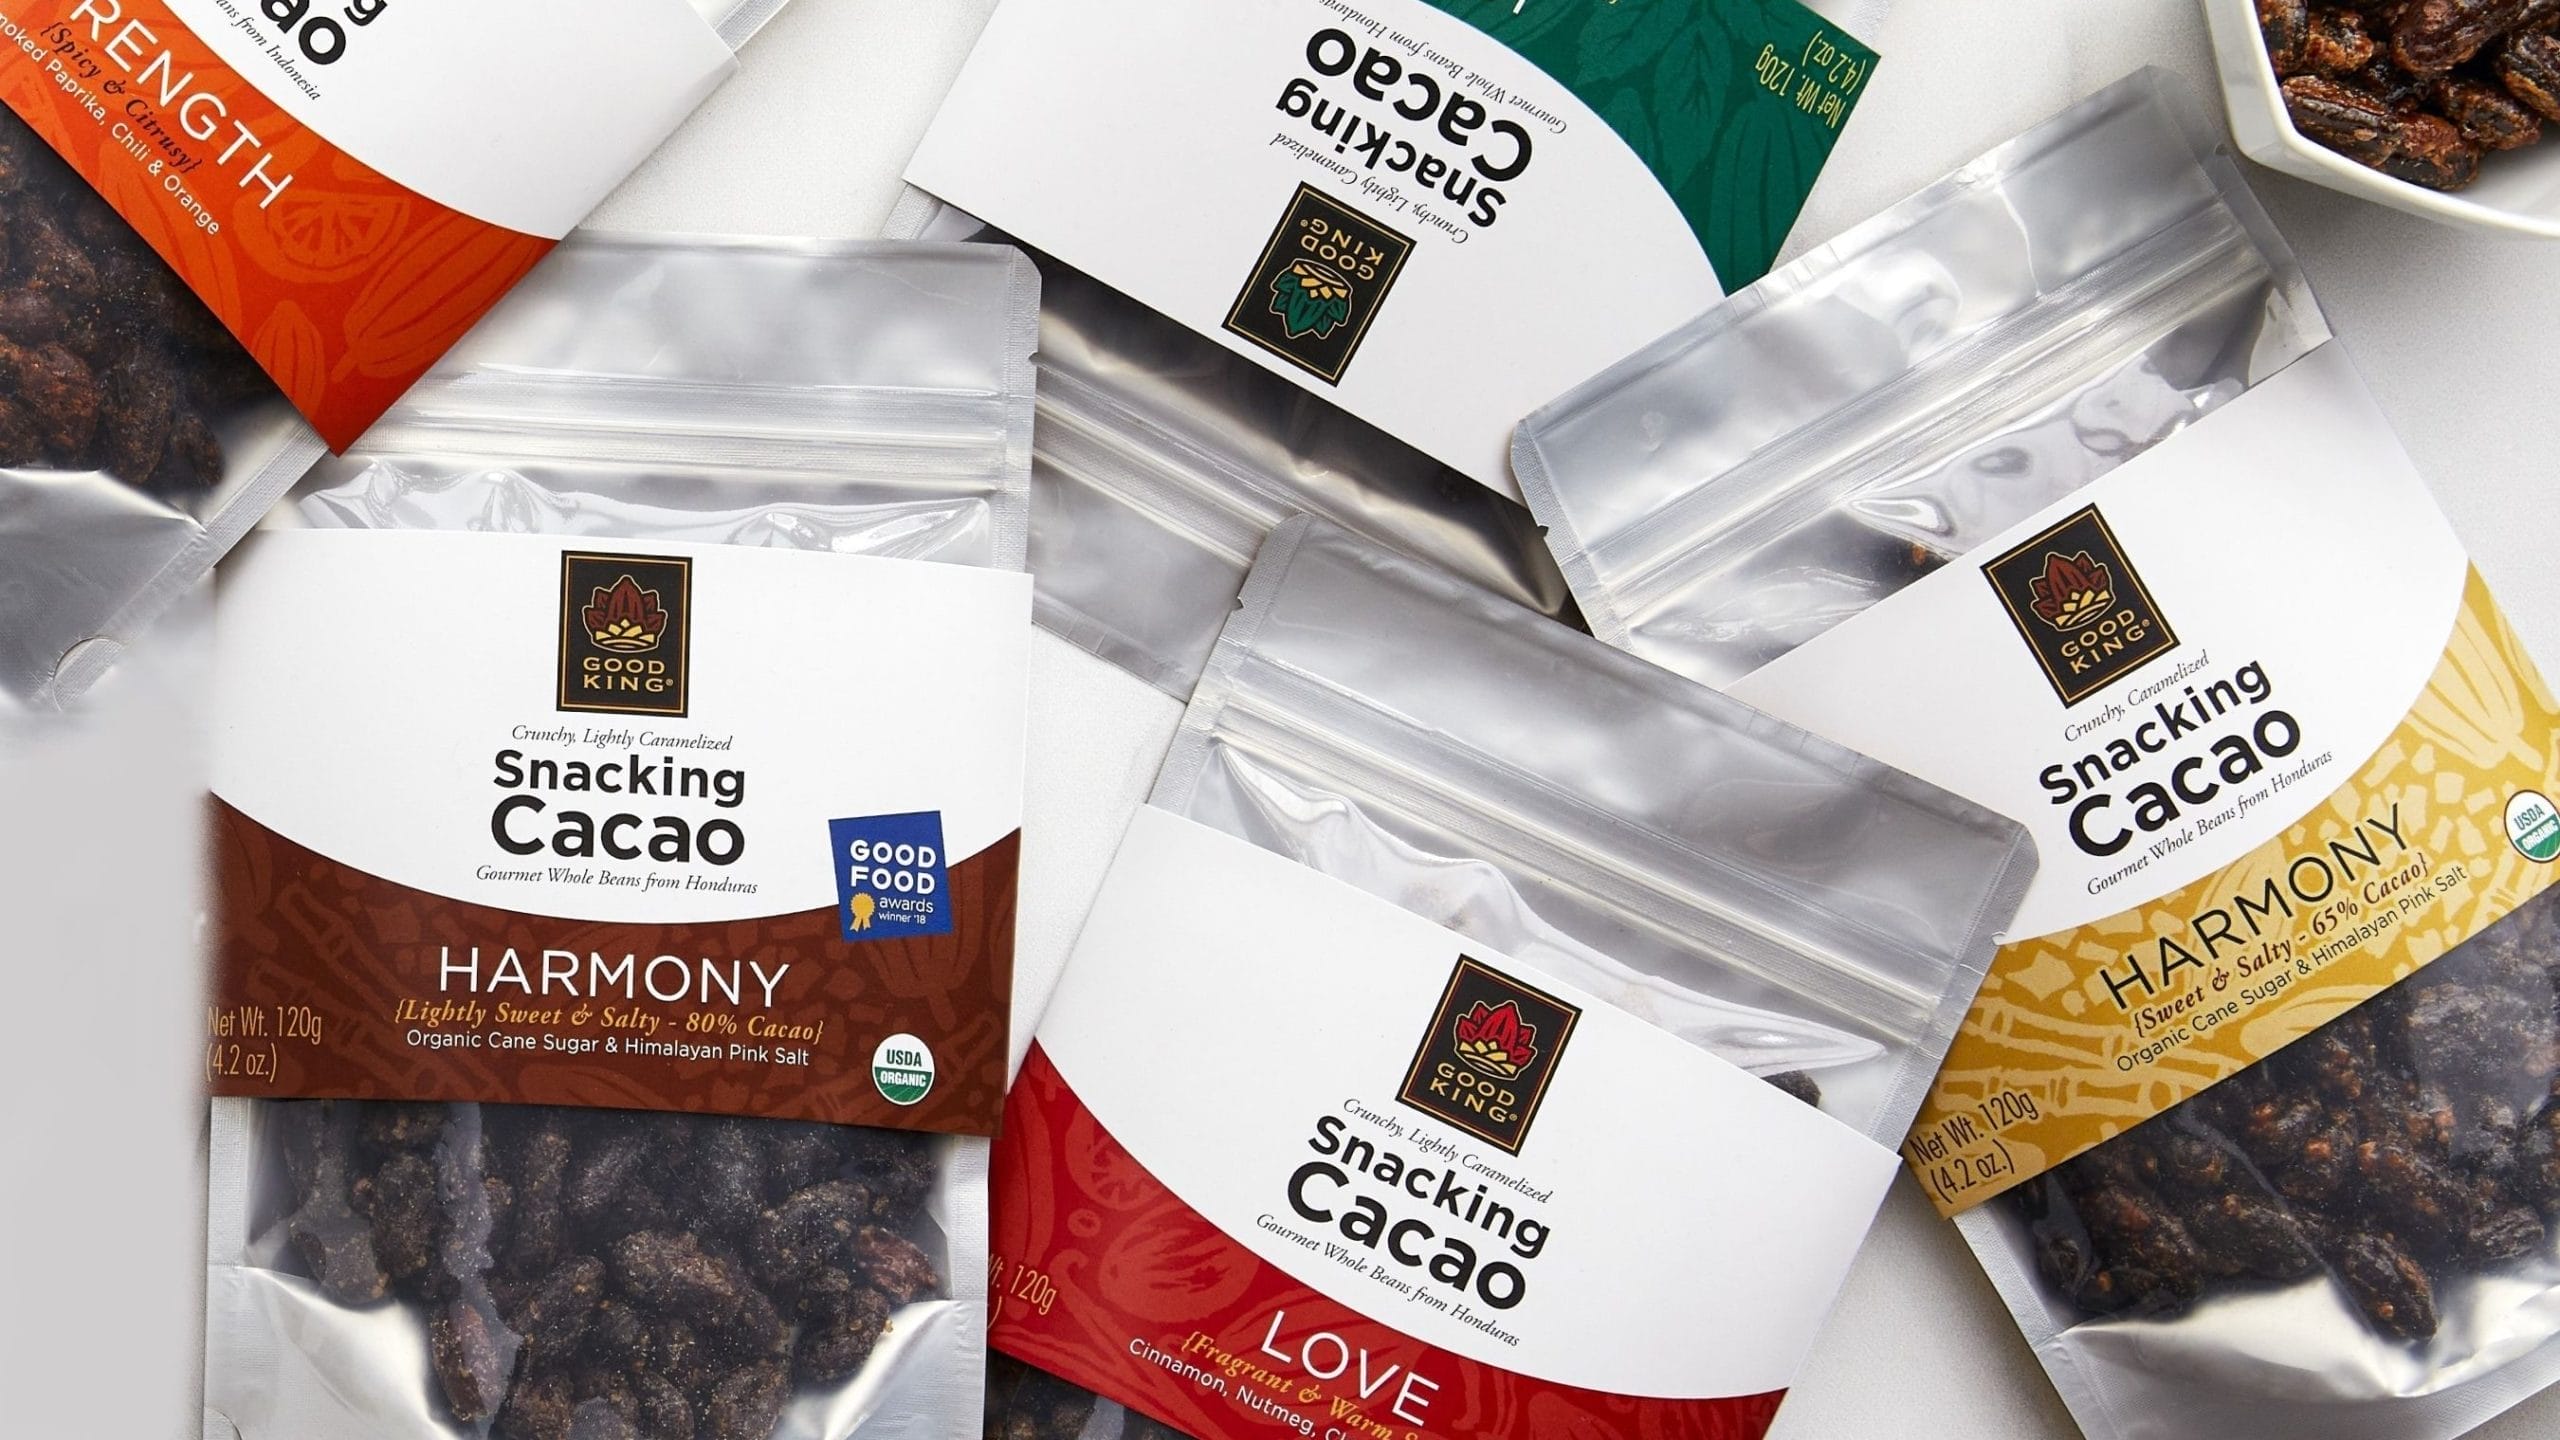 Cacao snack bags by Good King.